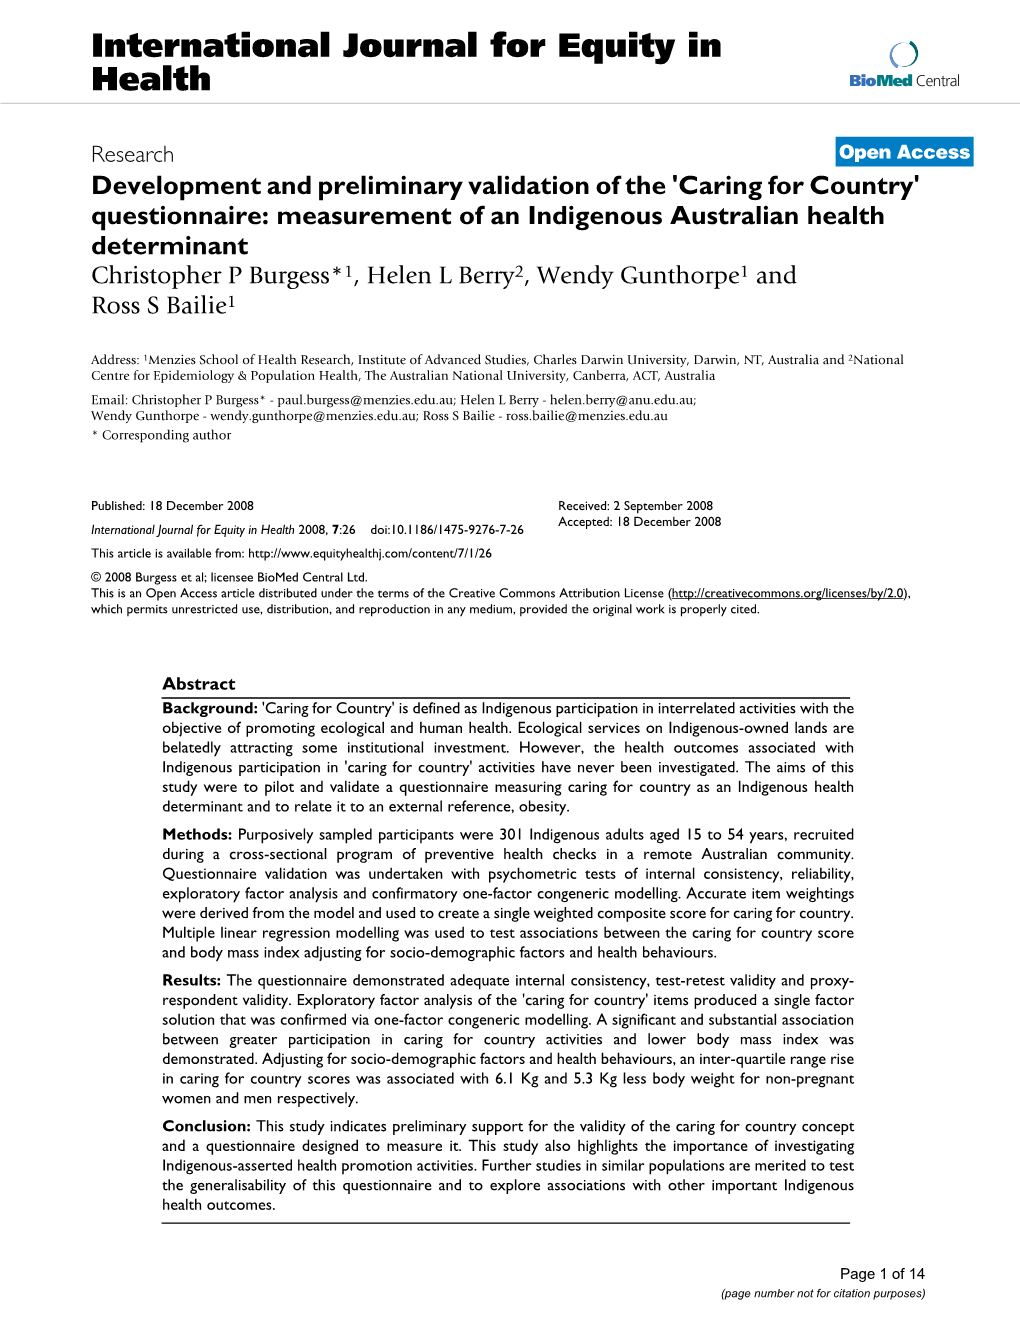 Development and Preliminary Validation of The'caring for Country'questionnaire: Measurement of an Indigenous Australian Health Determinant